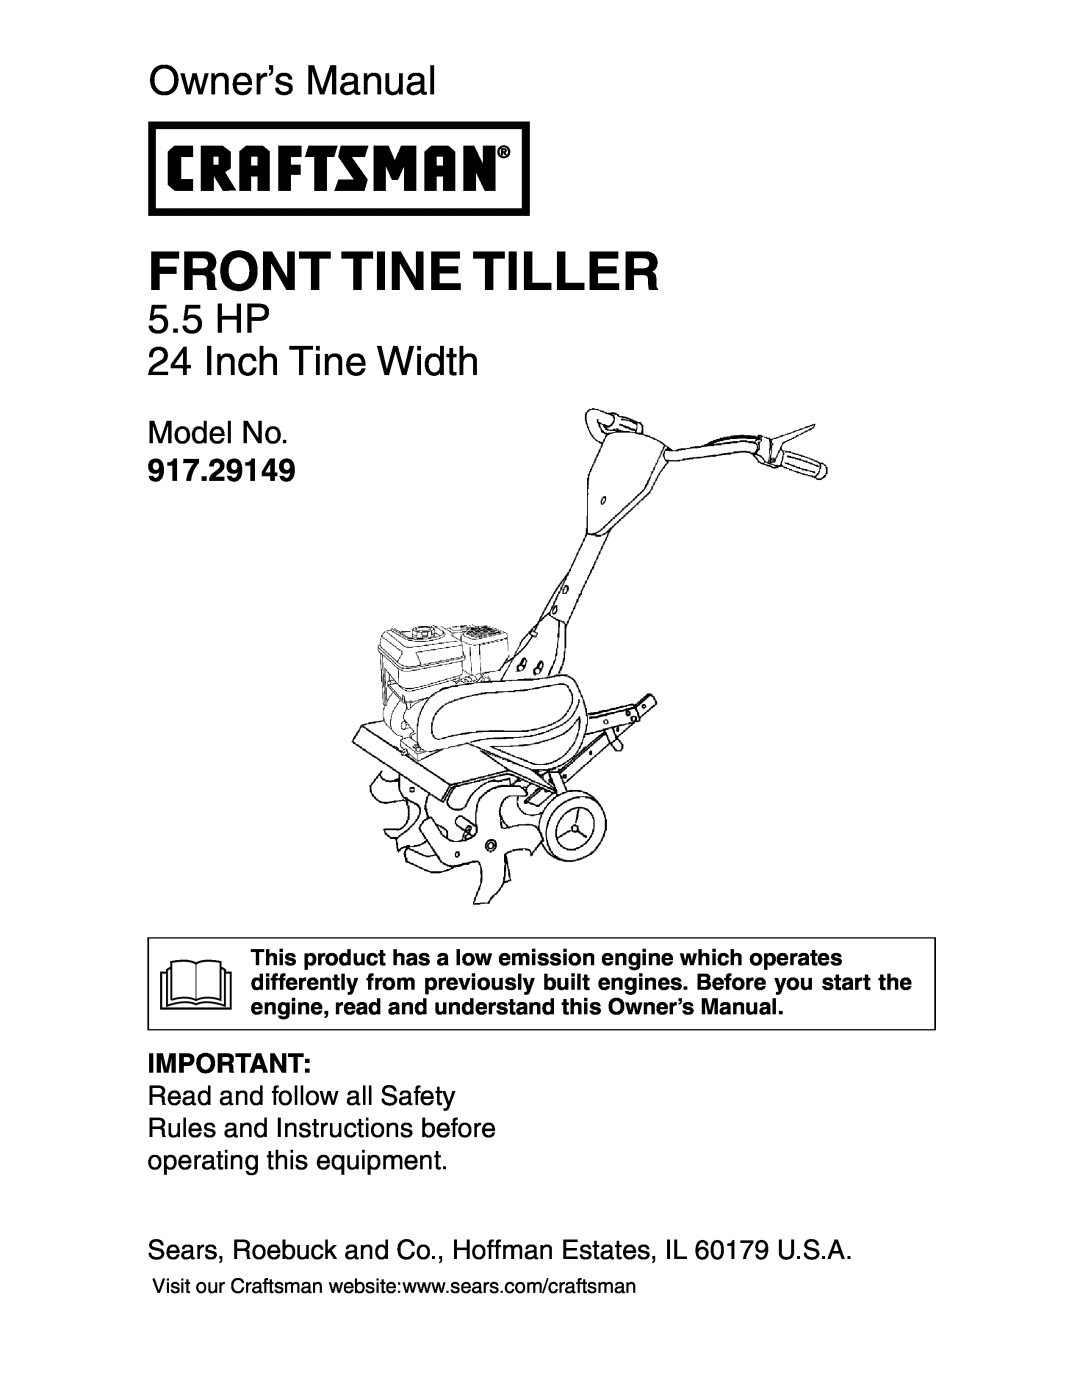 Sears 917.29149 owner manual Front Tine Tiller, Owner’s Manual, 5.5 HP 24 Inch Tine Width, Model No 